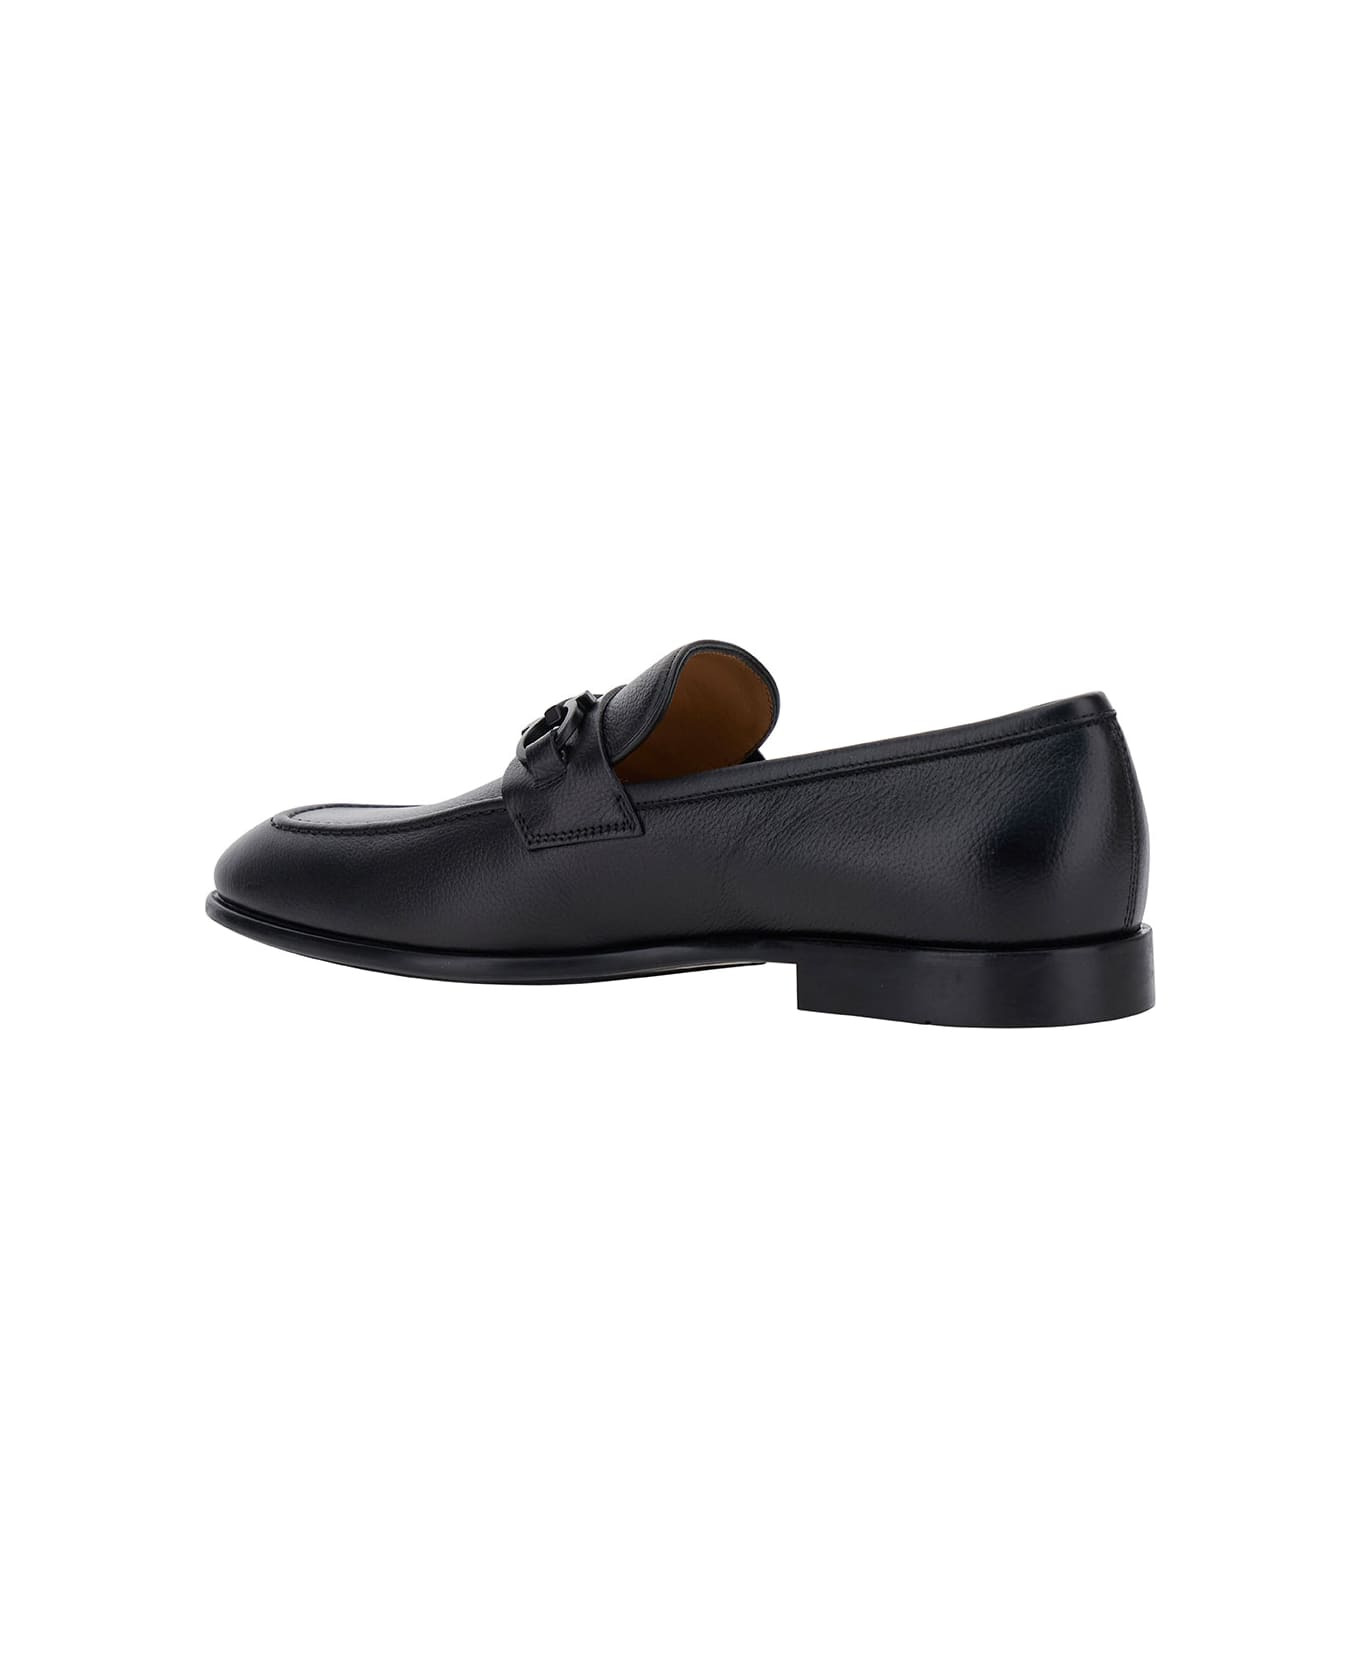 Ferragamo Black Loafers With Gancini Detail In Leather Man - Black